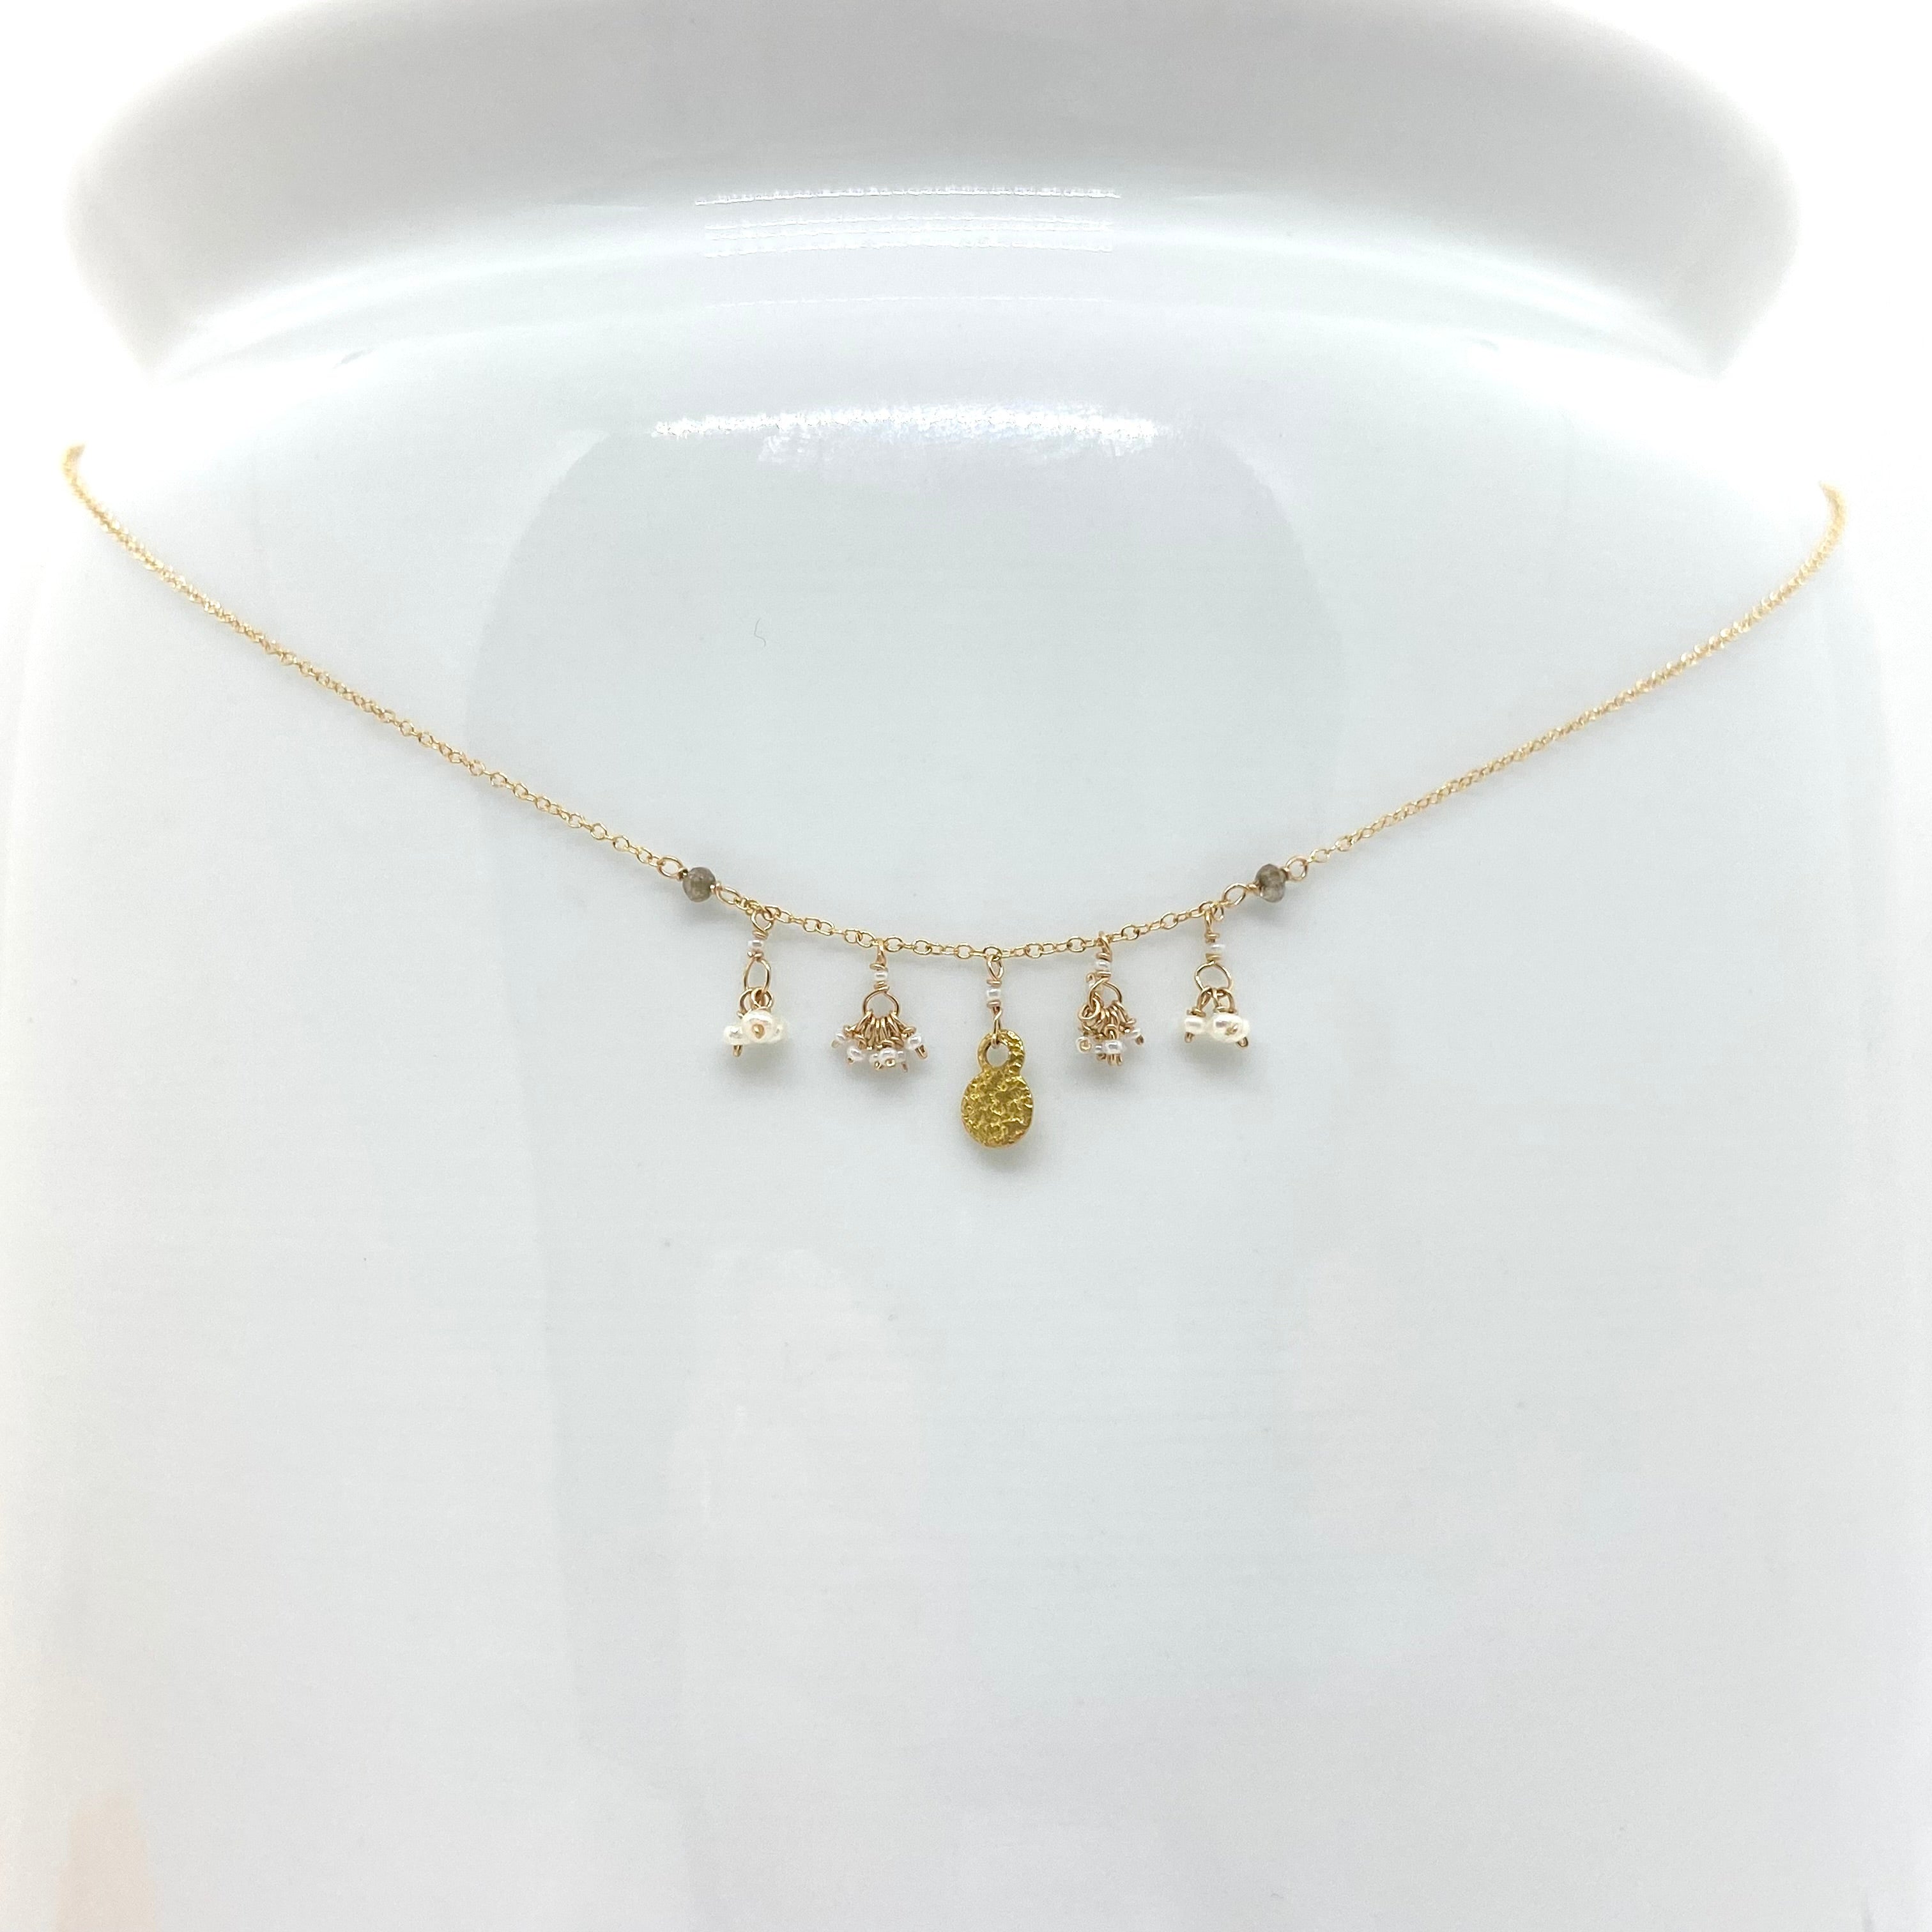 14k Gold Chain Necklace w/ 18k Gold Pendant, Freshwater Pearls, Diamonds & Antique Italian Beads